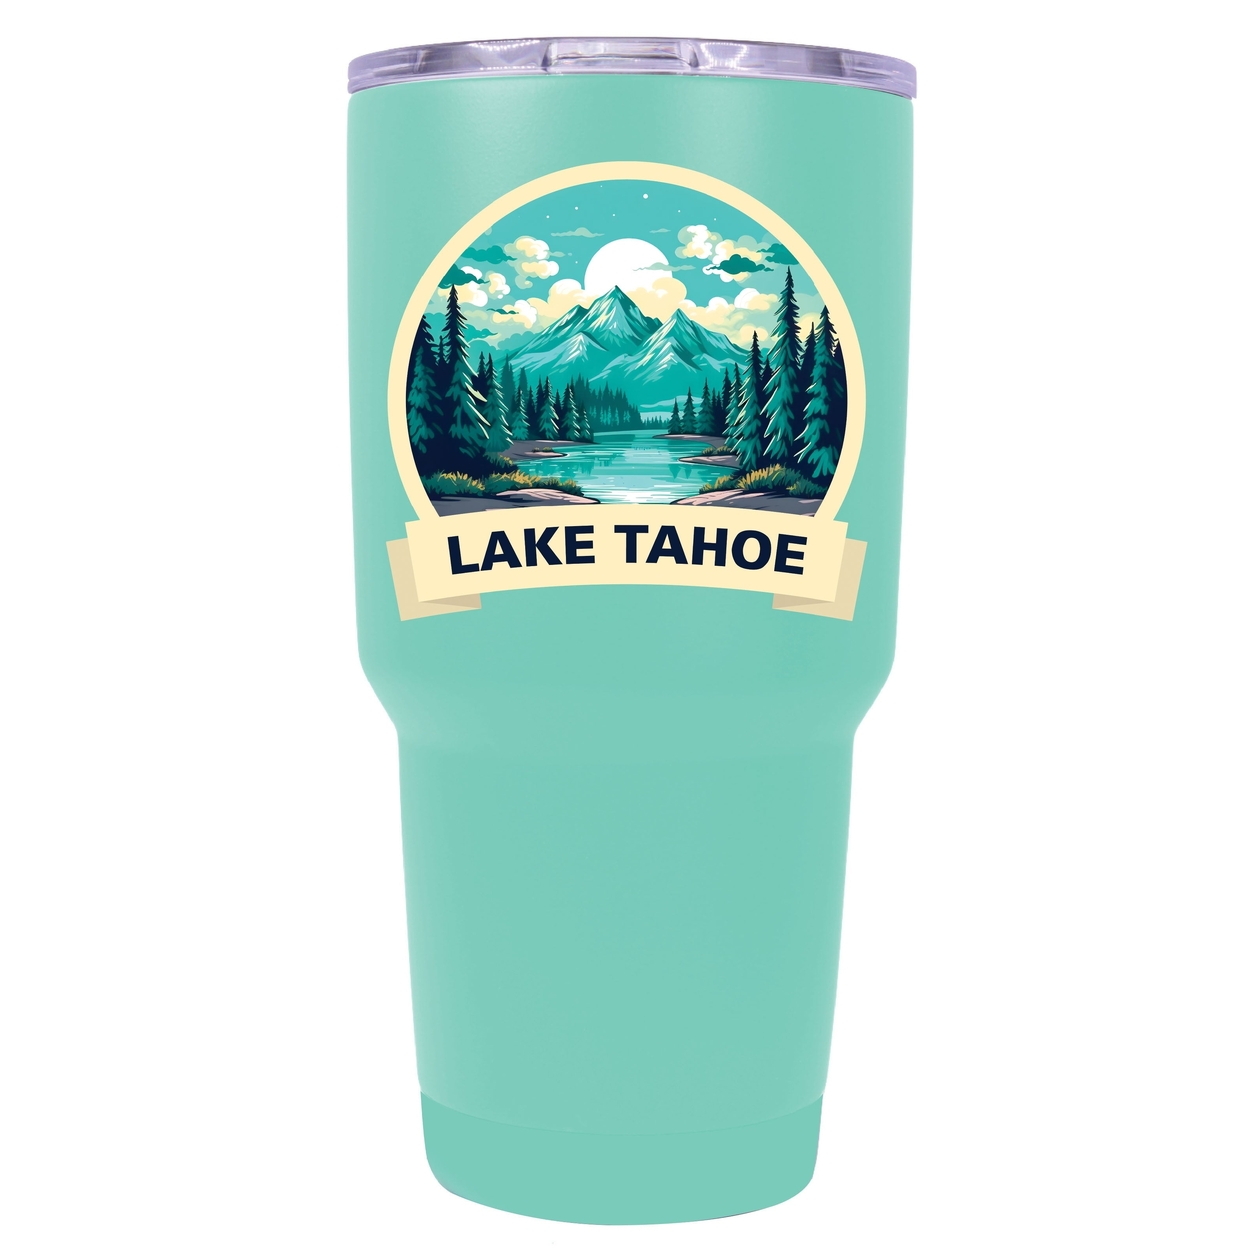 Lake Tahoe California Souvenir 24 Oz Insulated Stainless Steel Tumbler - Stainless Steel,,4-Pack